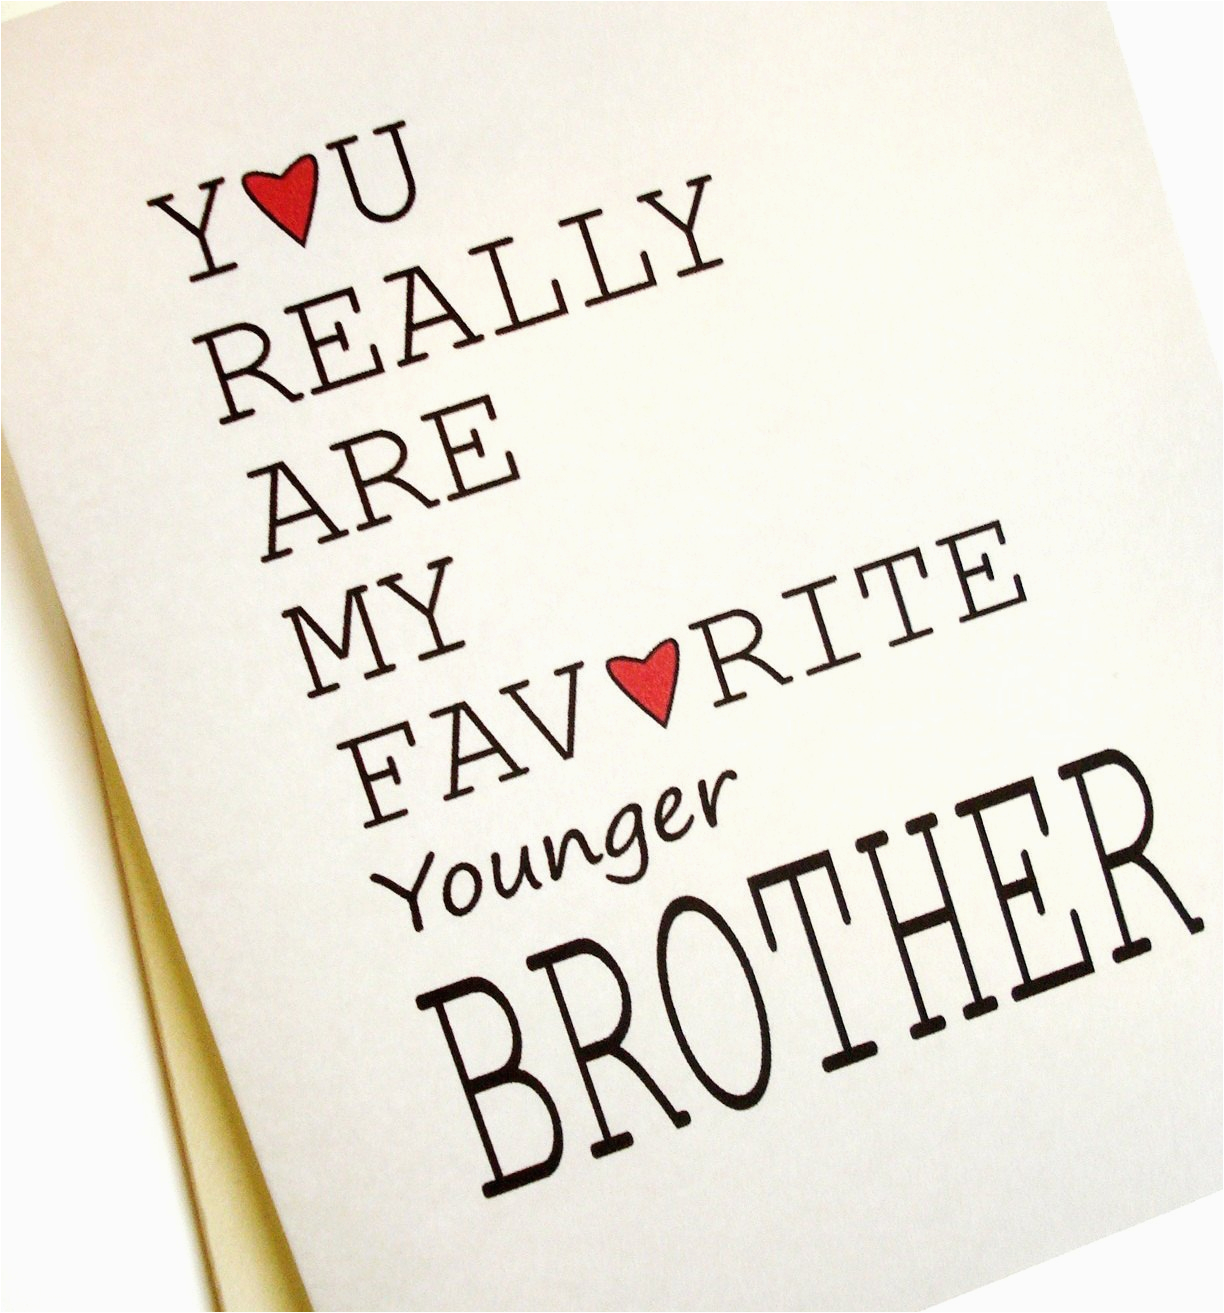 happy birthday younger brother quotes